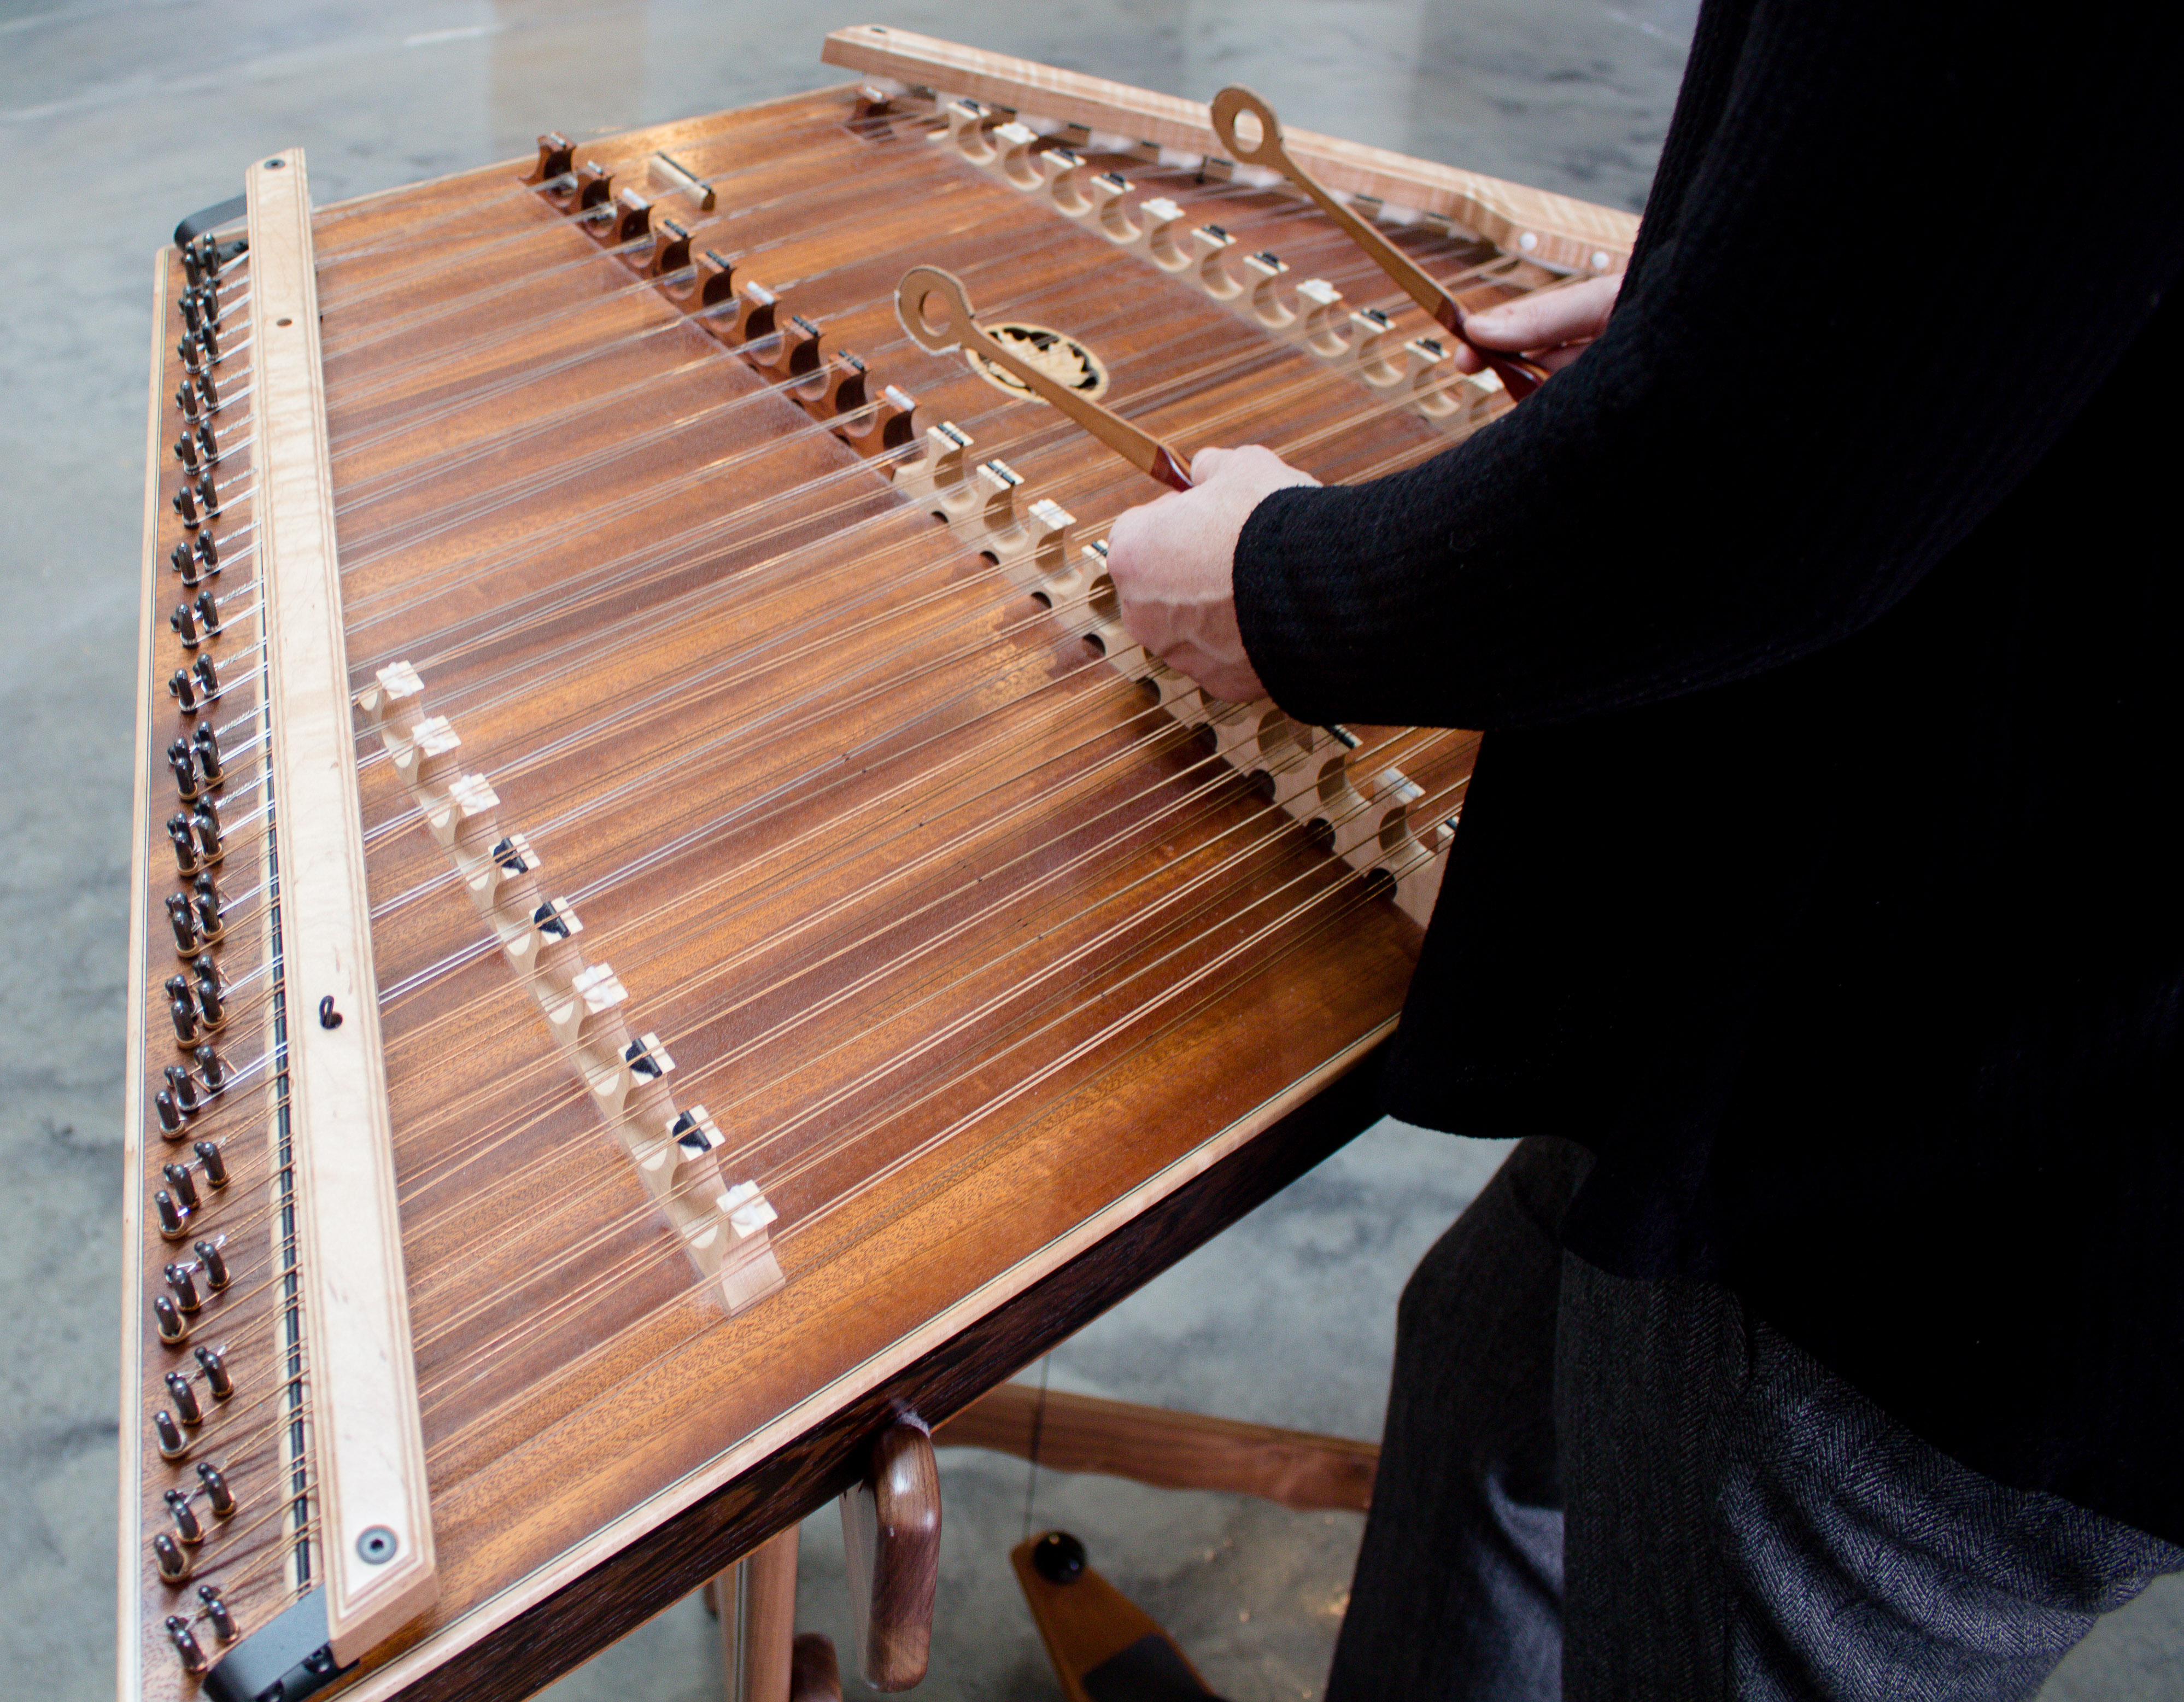 Mary Lynn van Deventer teaches hammered dulcimer, french horn, and piano! Here's a few shots from our recent photoshoot! | Teaspoon of Nose